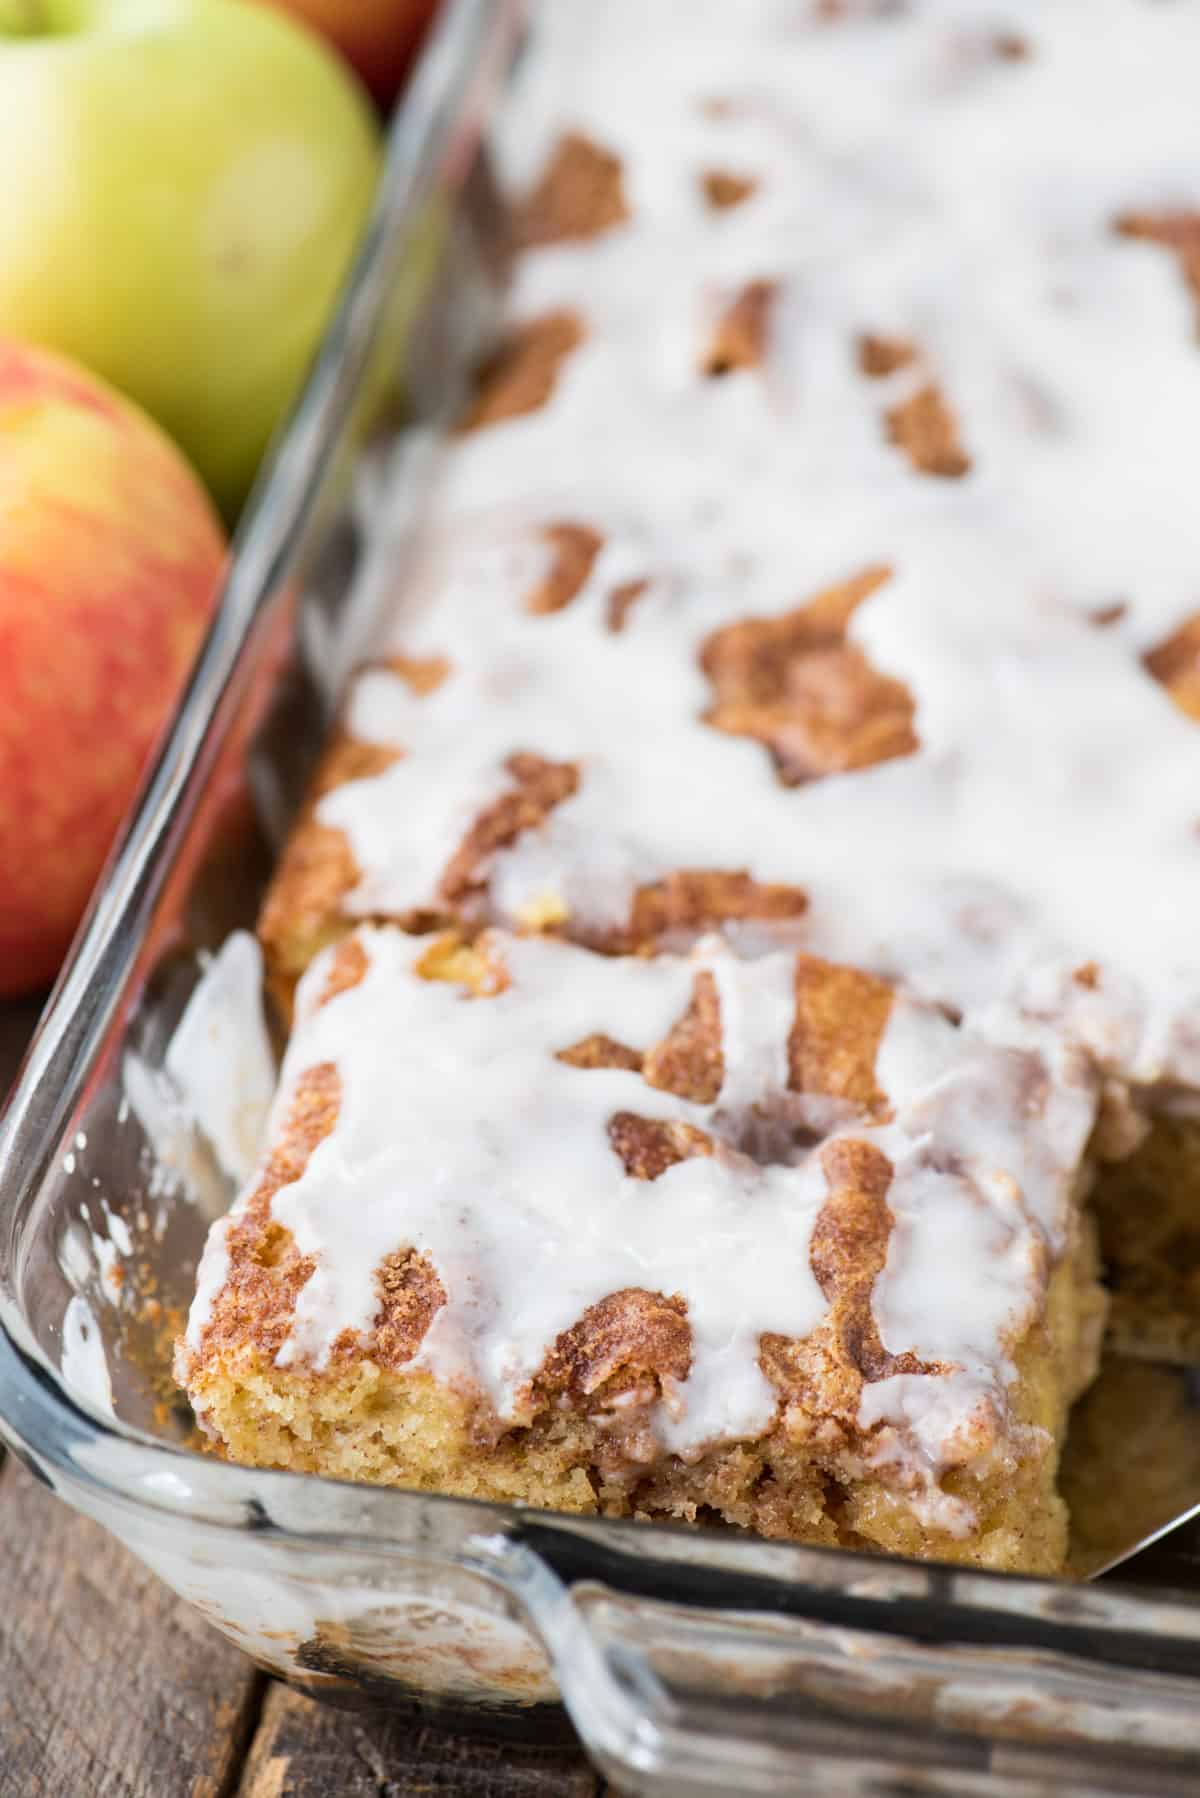 apple coffee cake with white icing in glass 9x13 inch pan